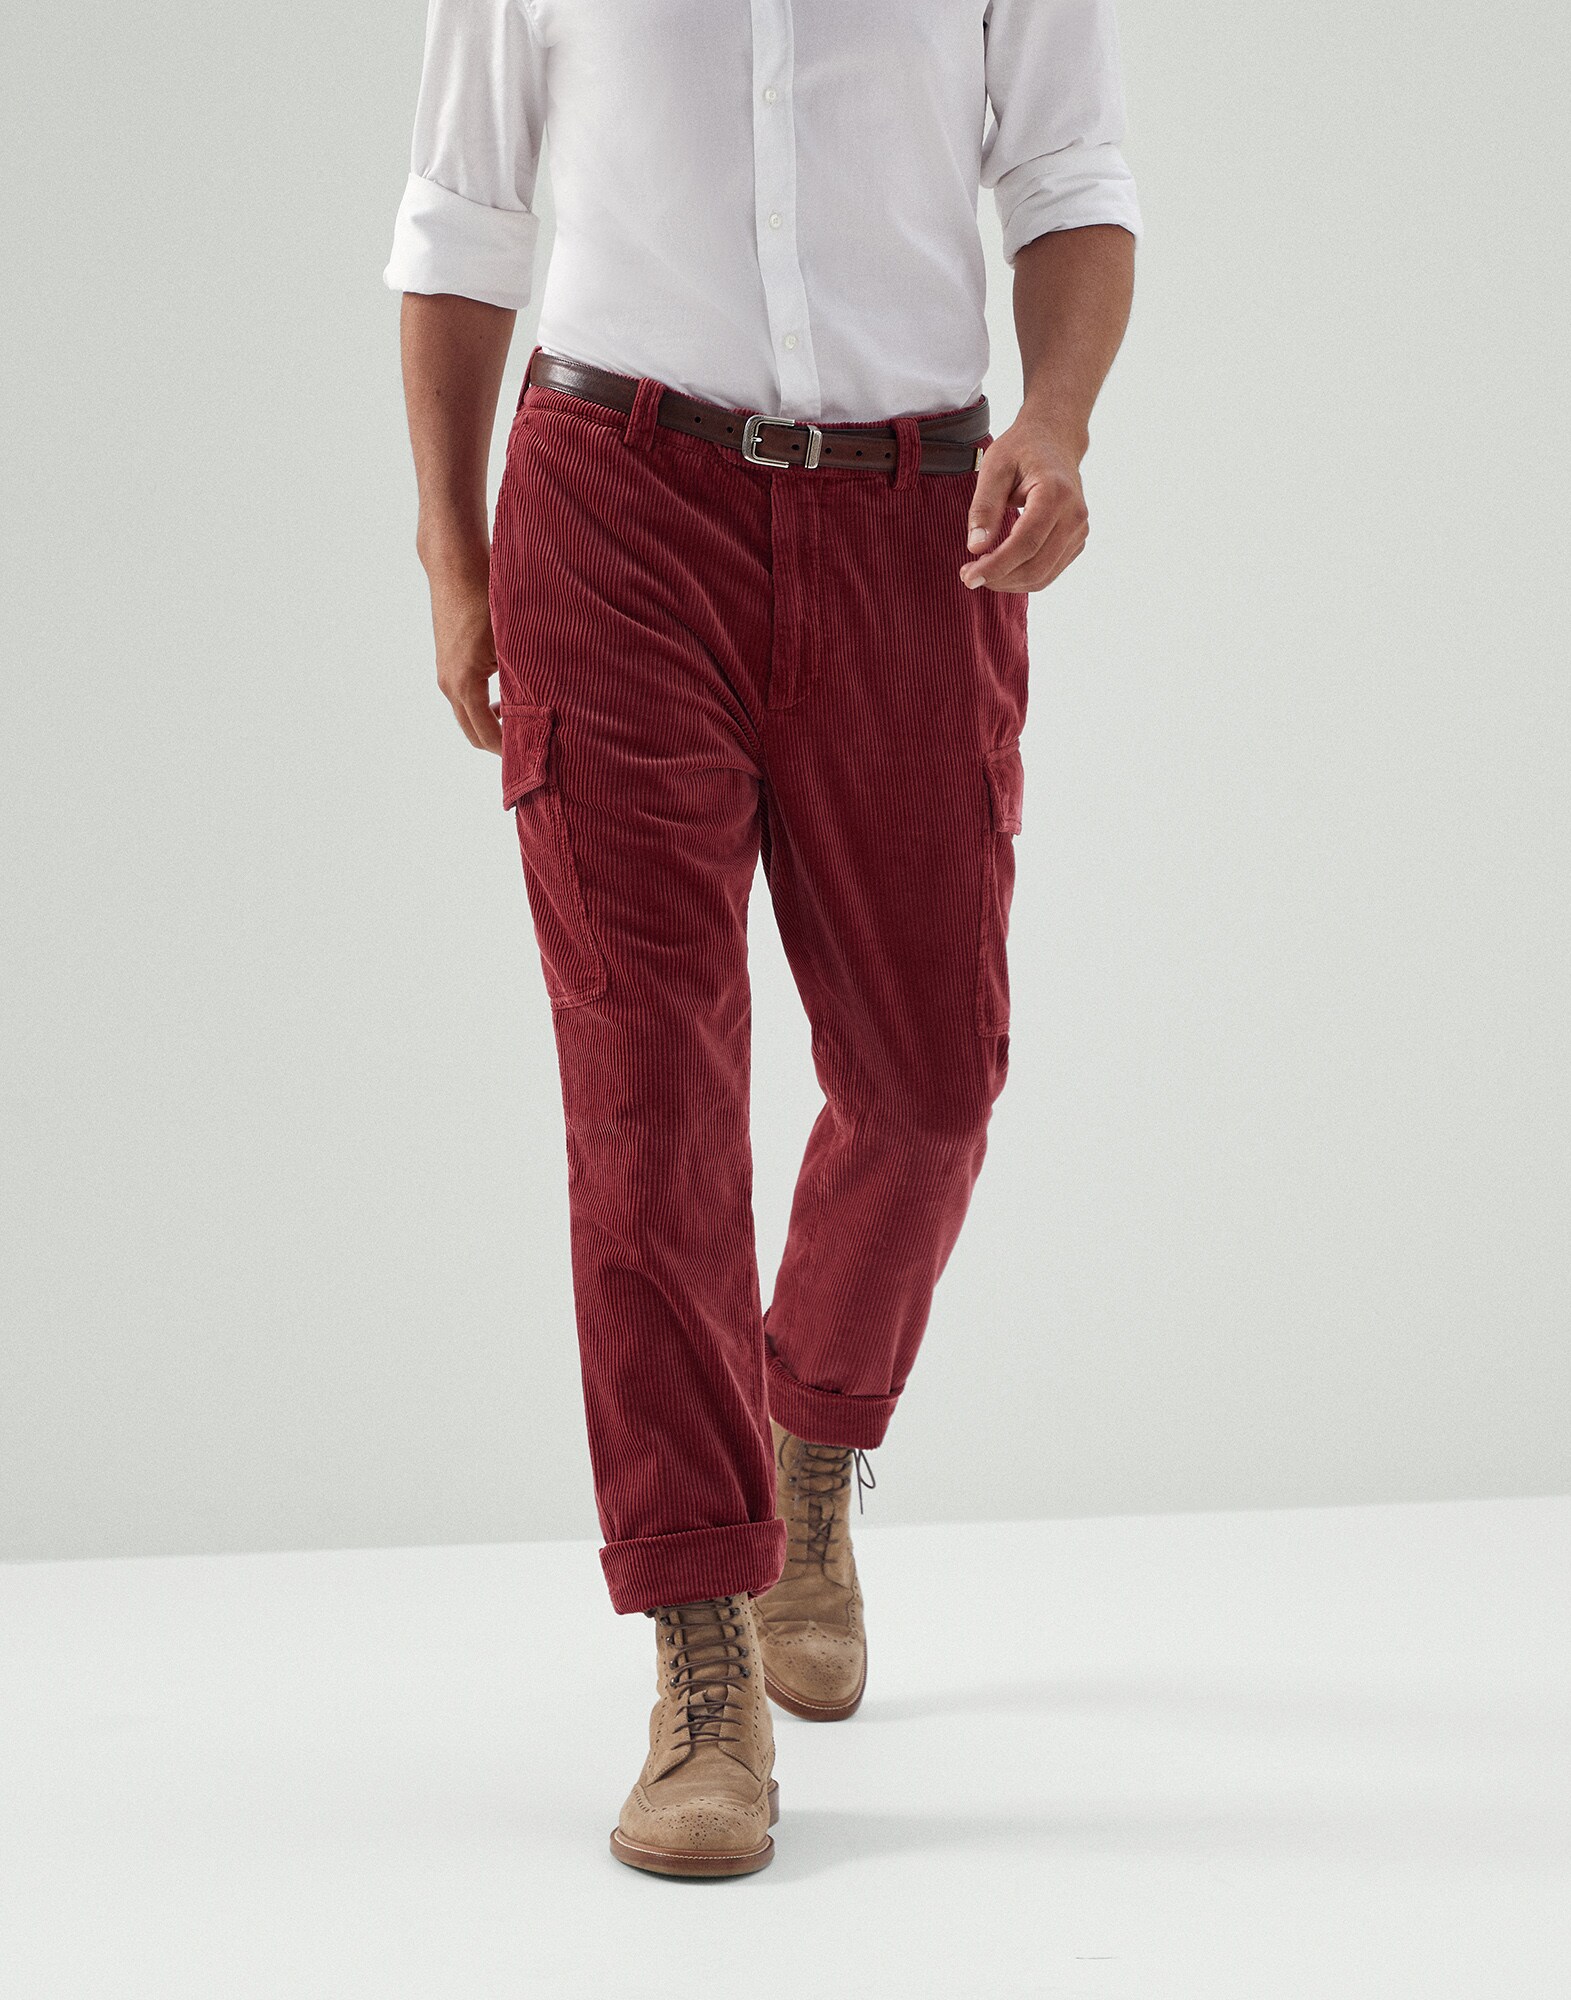 Leisure fit trousers with cargo pockets